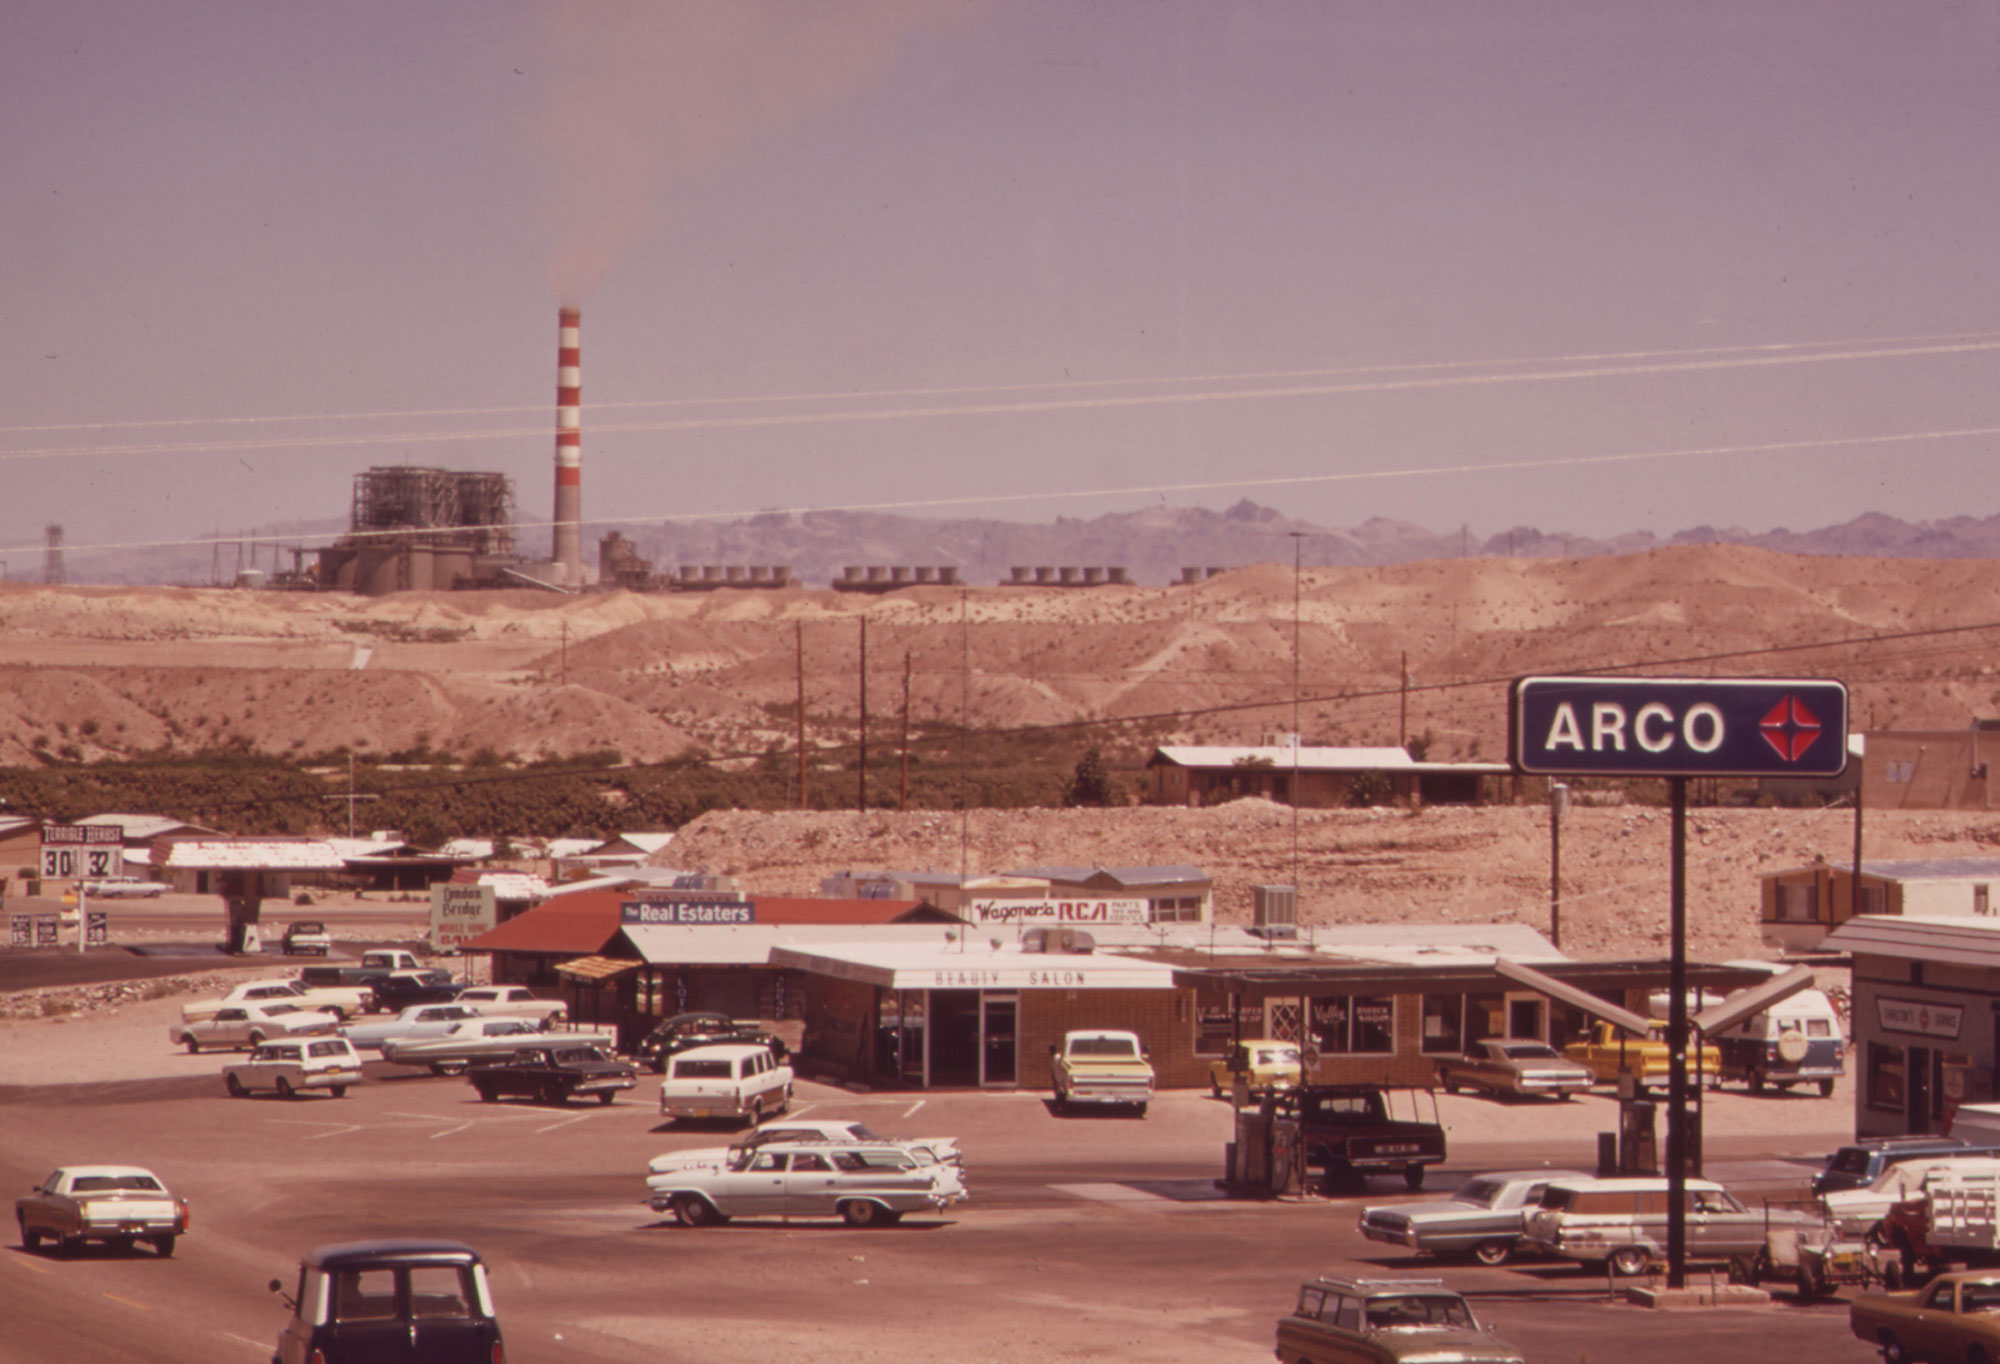 Photograph of the Mohave Generating Station, a power plant that formally stood in Nevada. The photo shows a power station with a tall white-and-red striped smokestack on a hill in the background; other power plant structures are around it. In the foreground, old cars and buildings in Bullhead City, Arizona can be seen. The picture is from the 1970s.